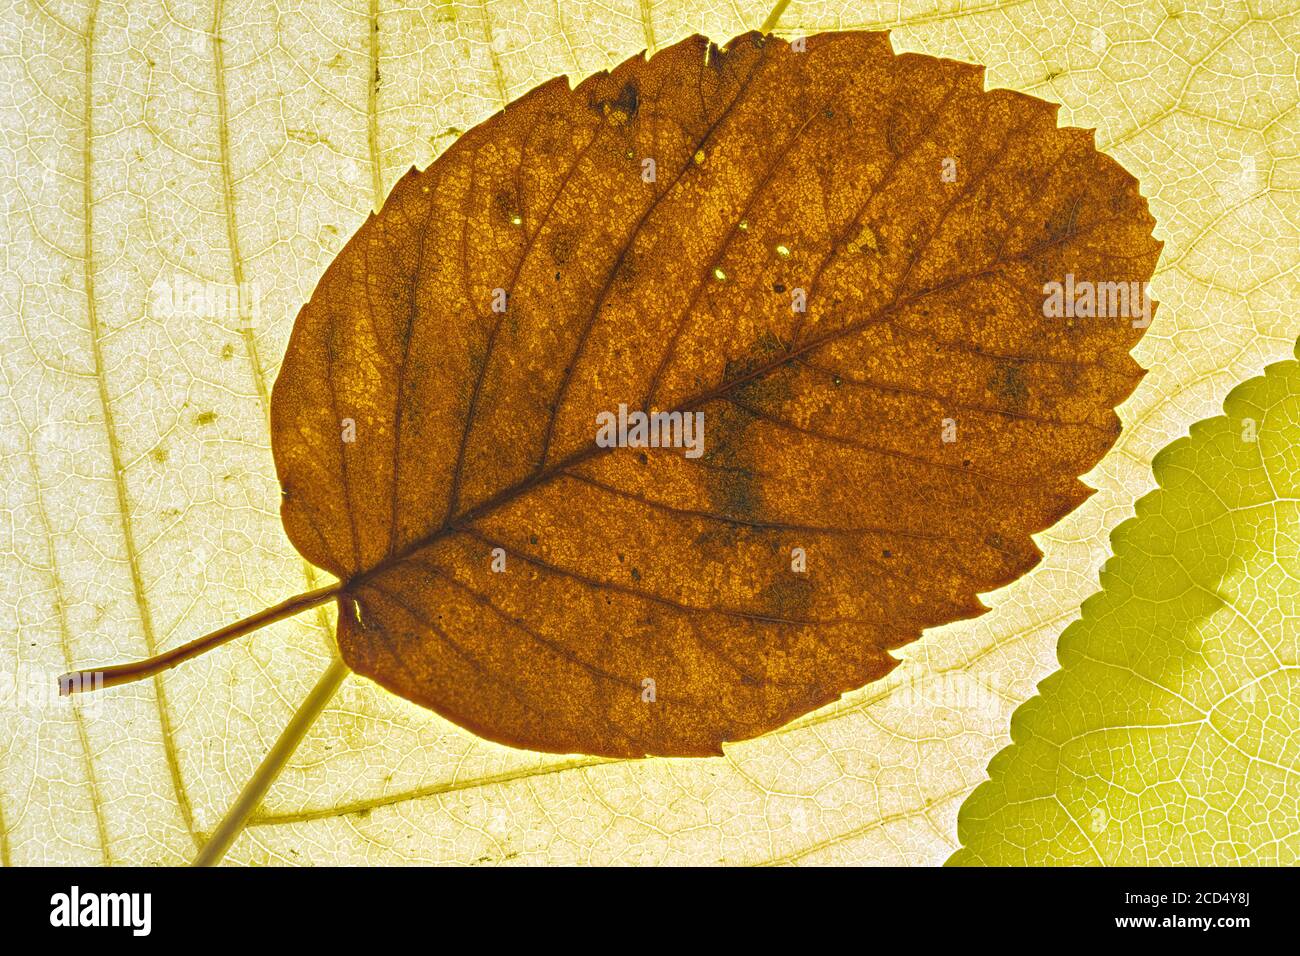 Autumn Leaves with Green and Brown Colors Stock Photo